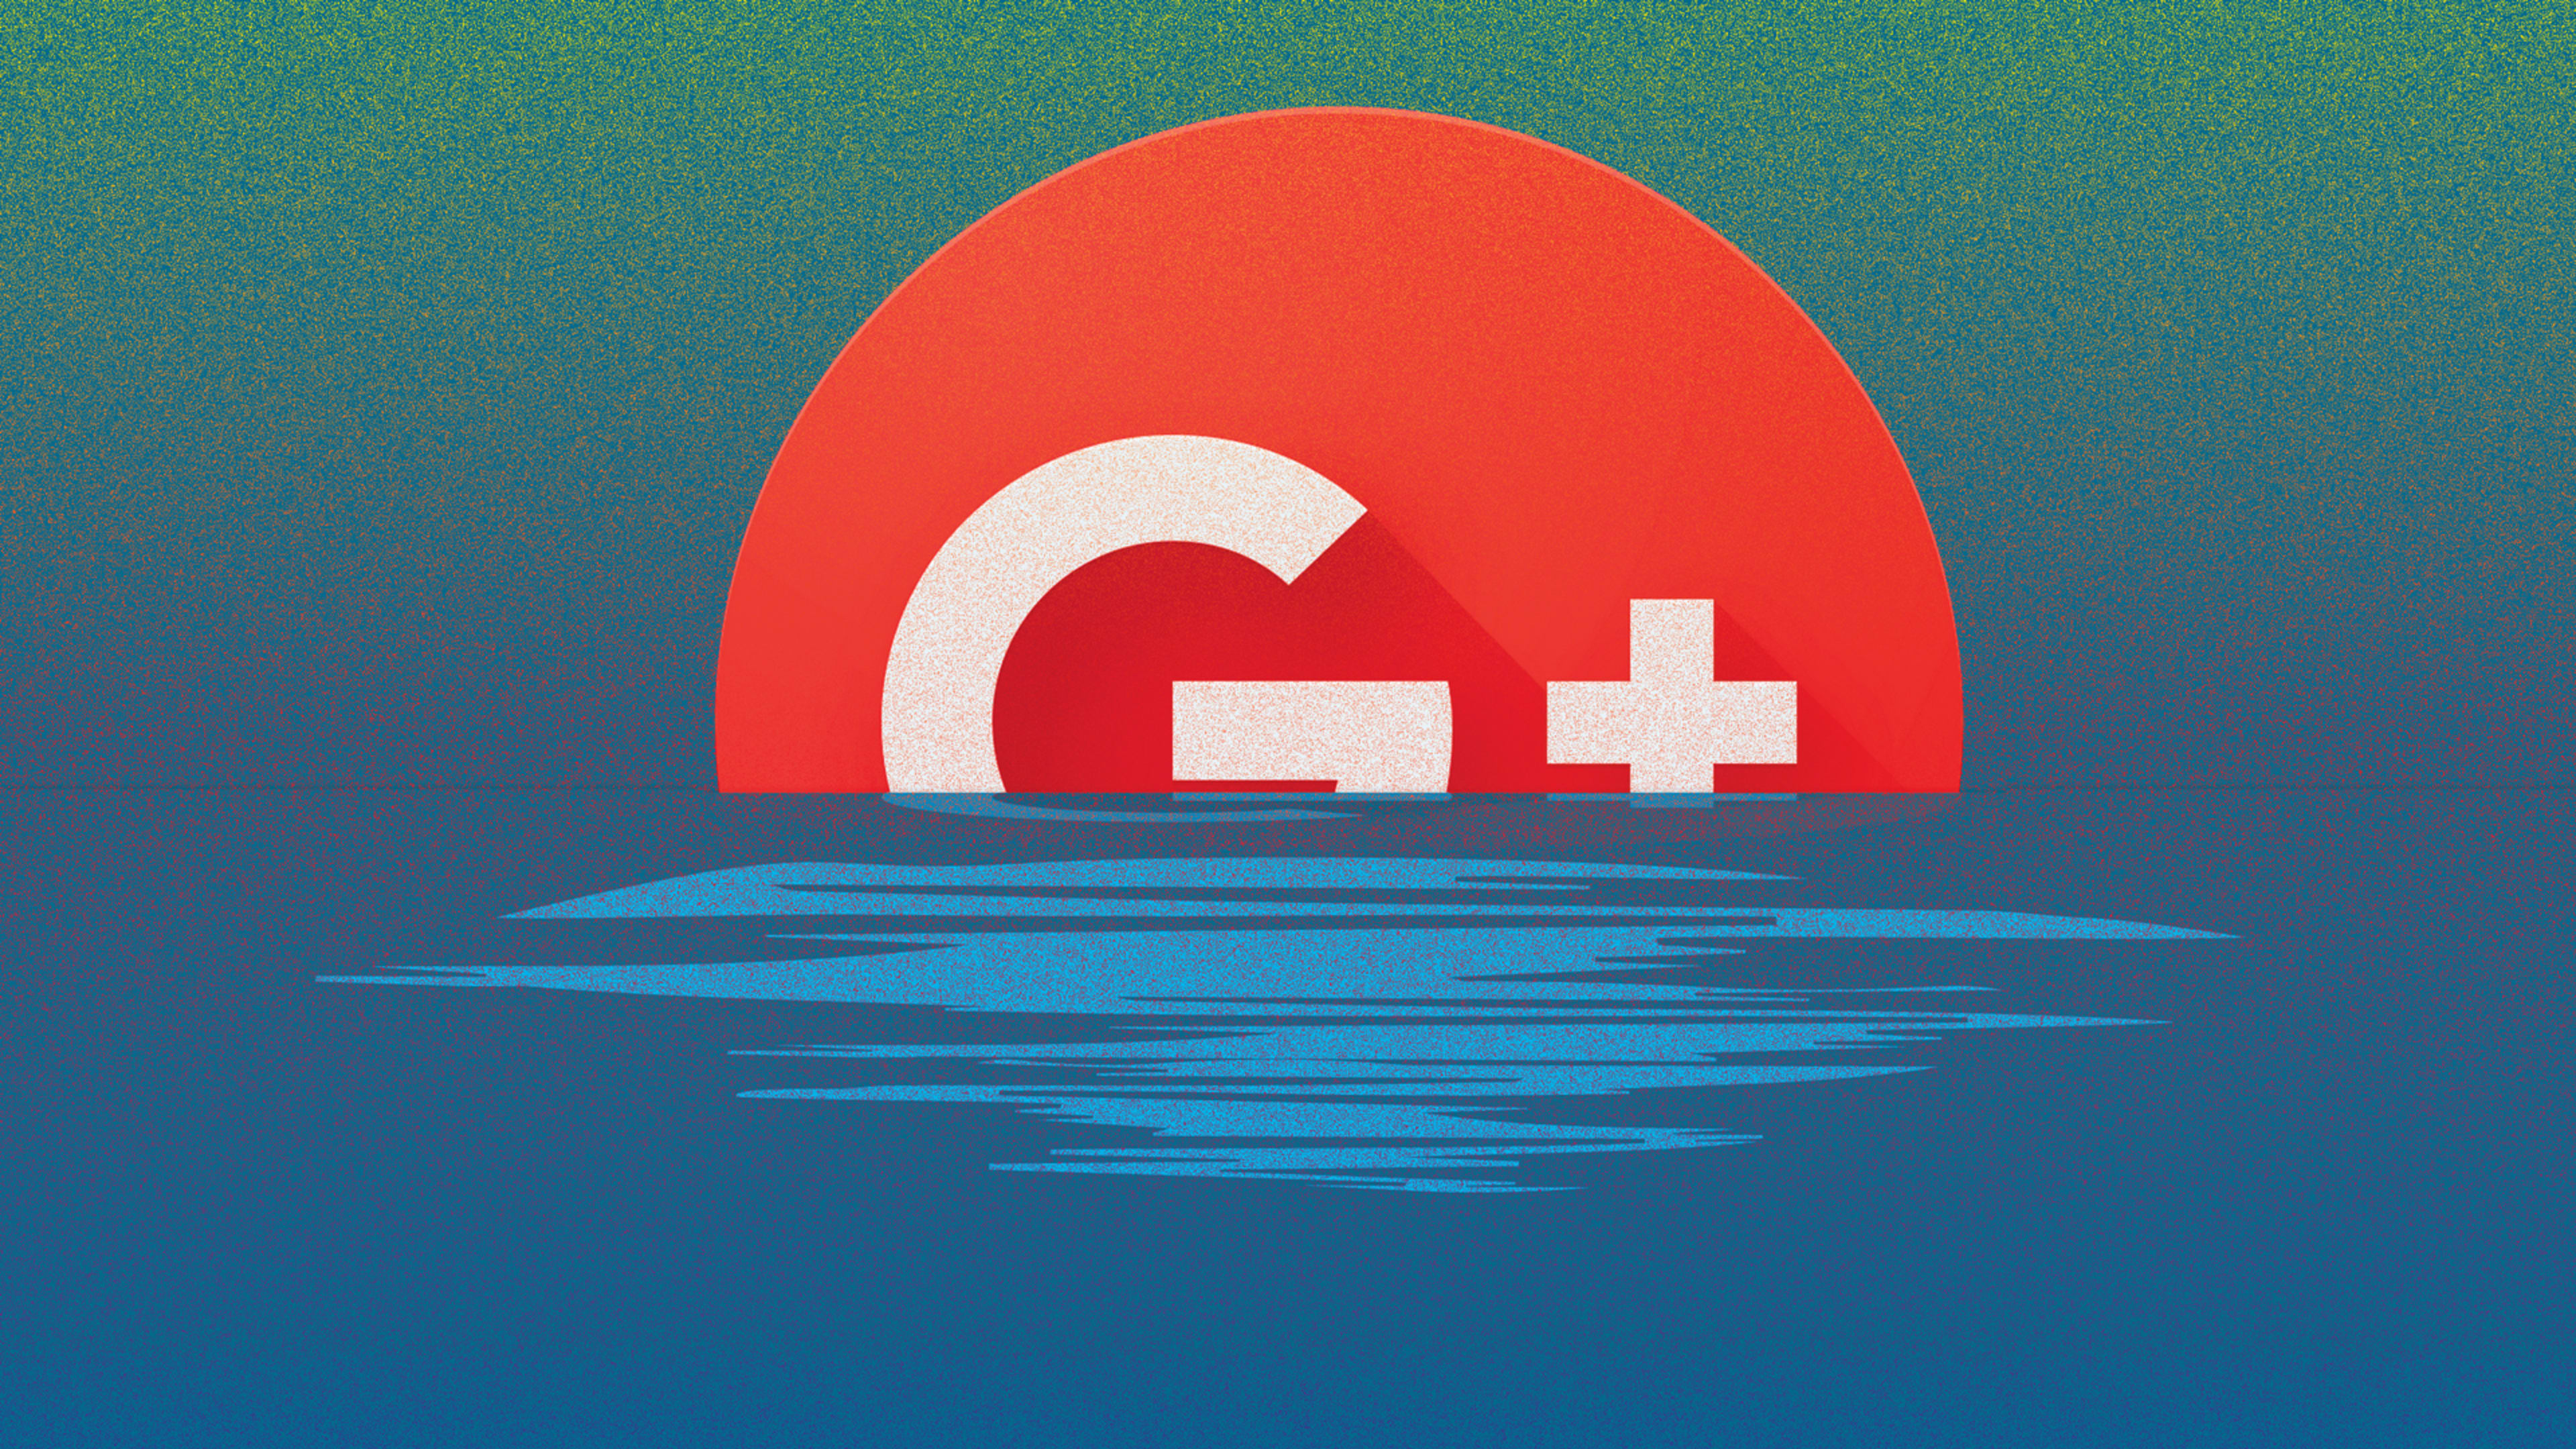 Goodbye, Google+: A eulogy for the last great social network